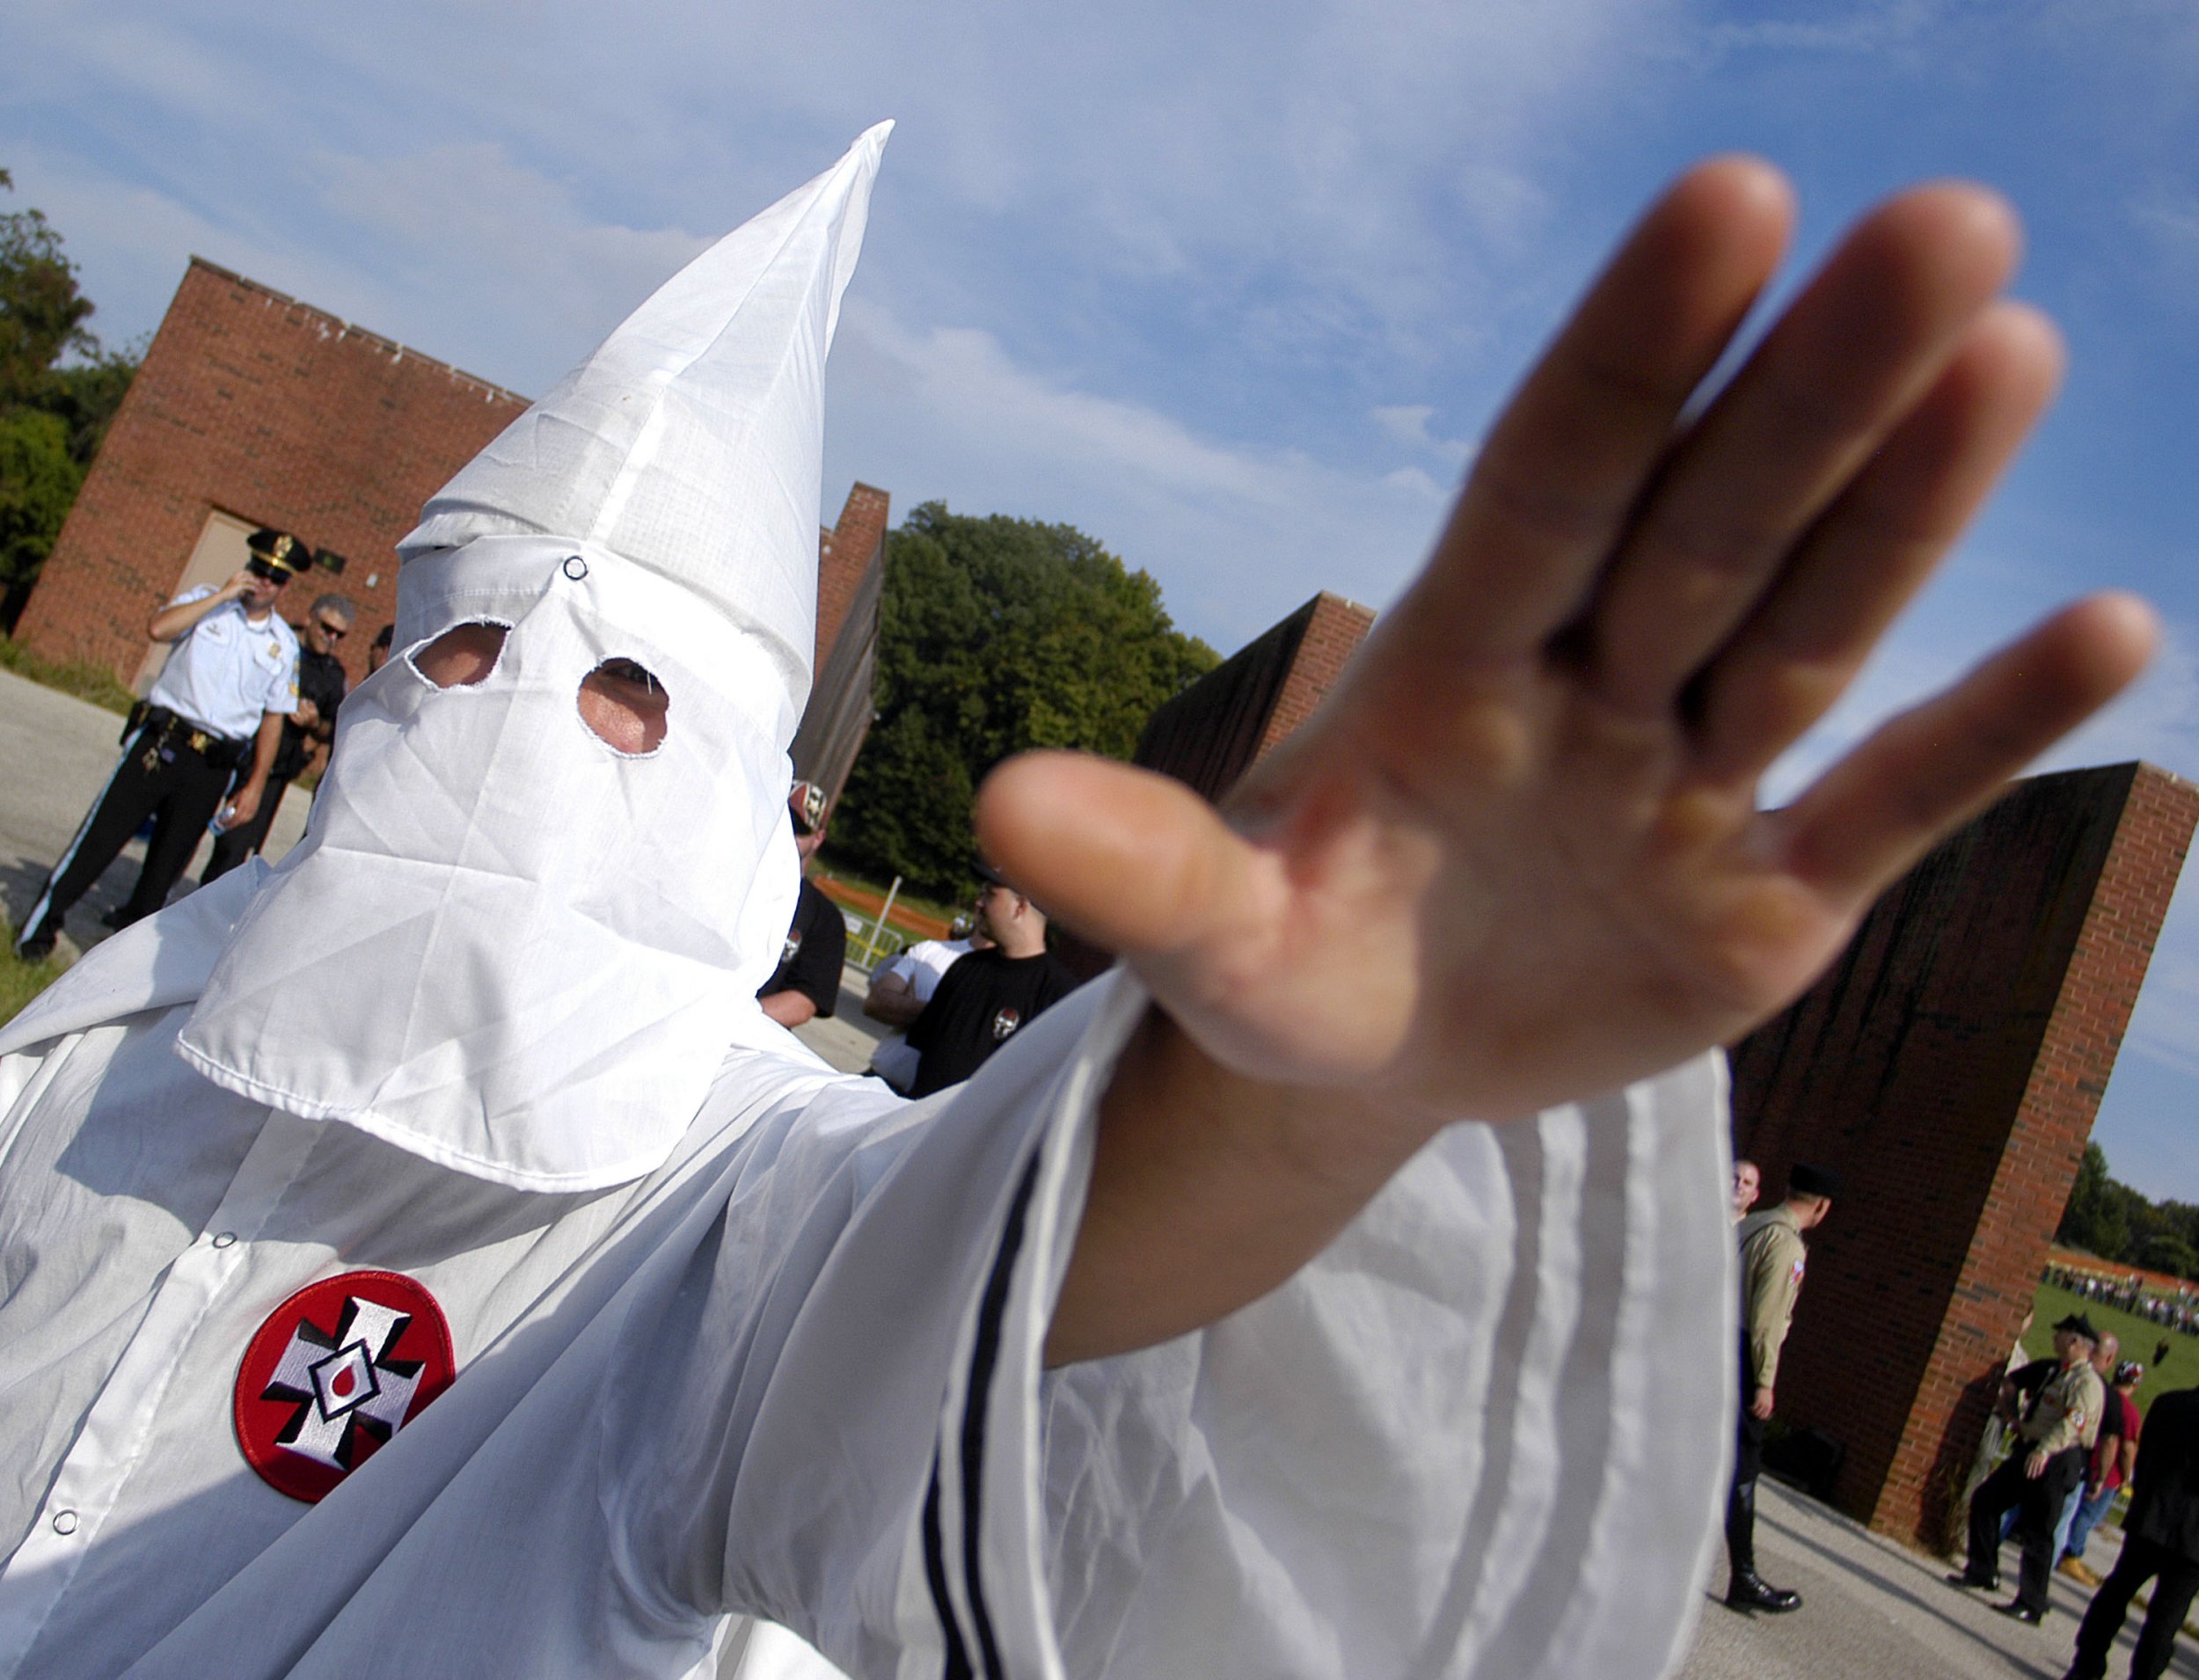 Man in a KKK Outfit Wins 1st Place at Montana Costume Contest